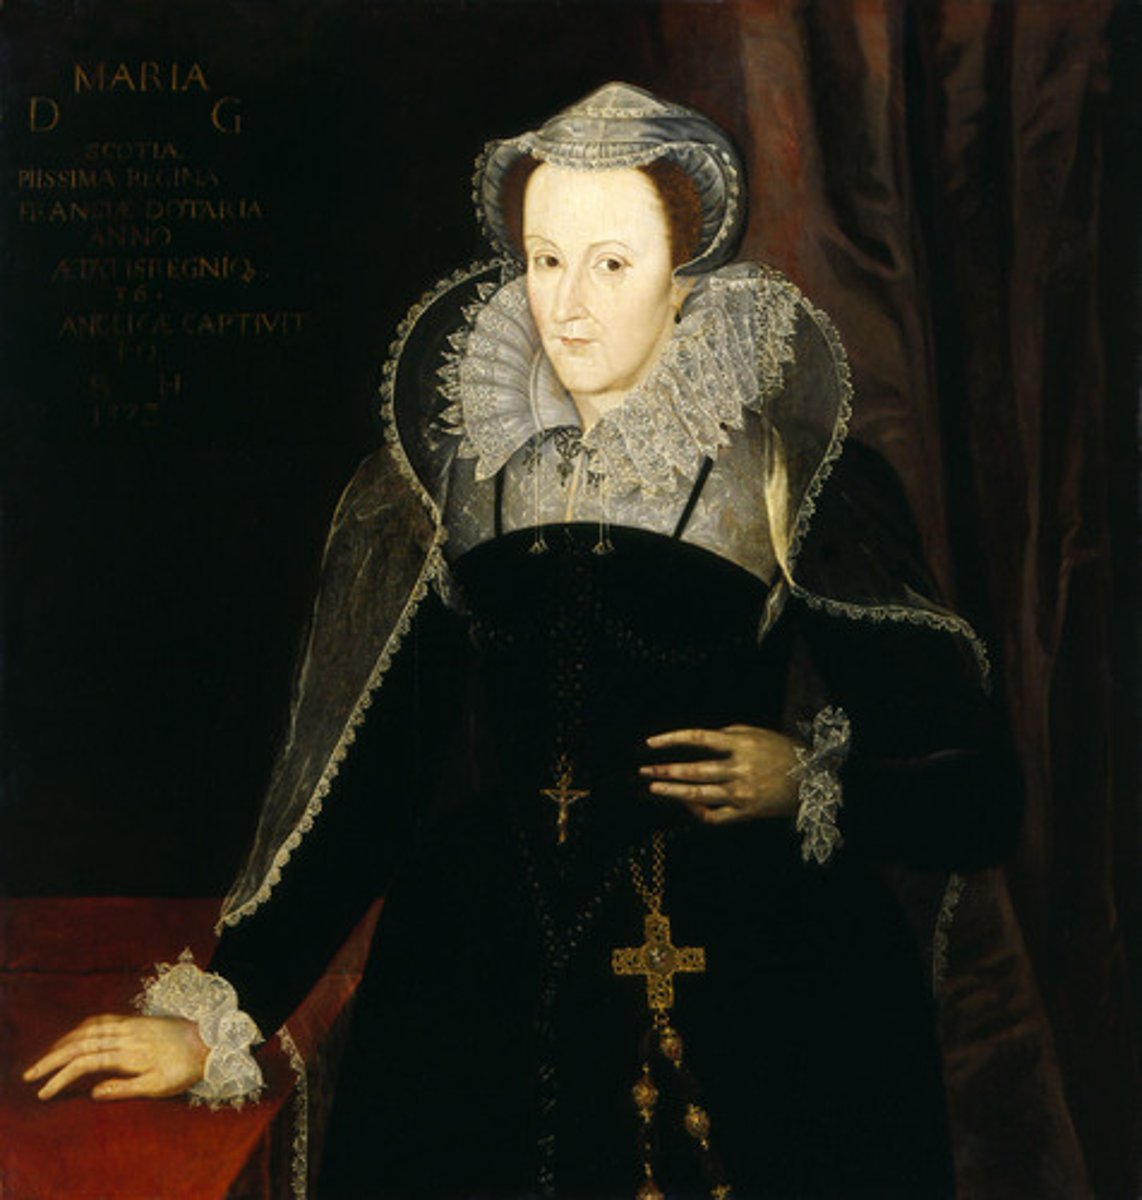 <p>Preceded Elizabeth I. Enforced Catholicism with Spanish husband Phillip II and punished Protestantism with death. Known as "Bloody Mary". Would die young giving the throne to Elizabeth.</p>